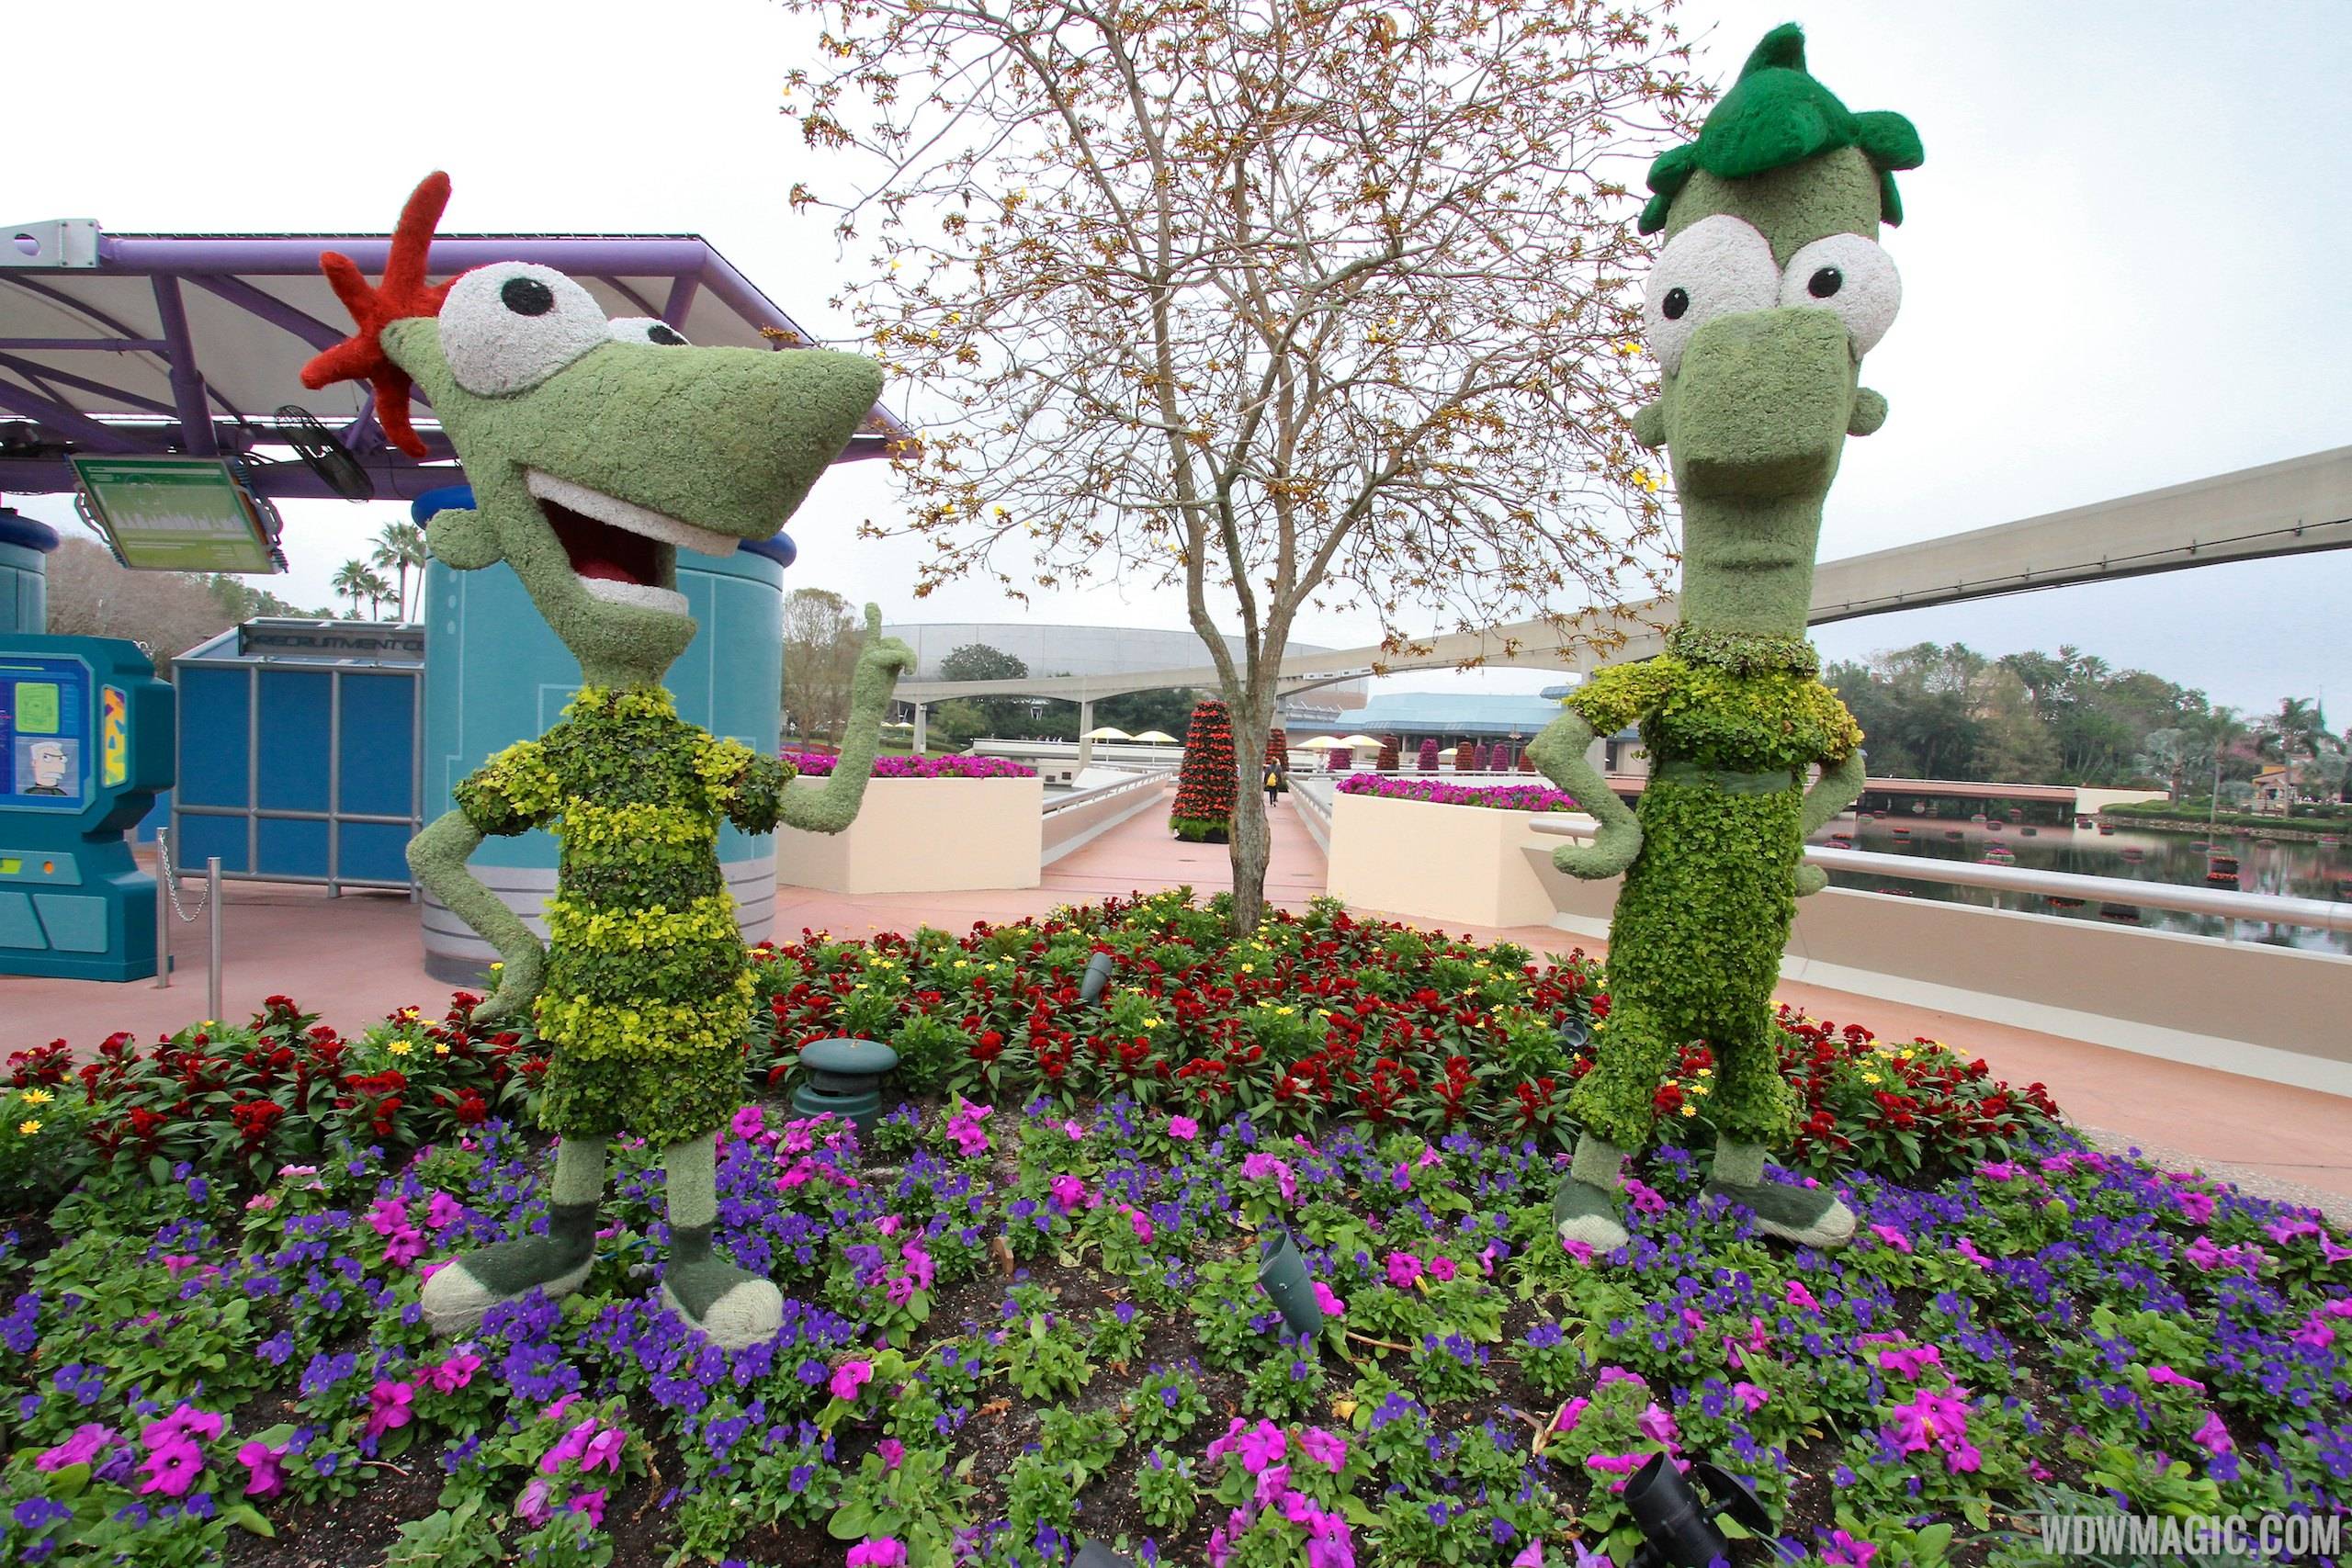 2014 Epcot Flower and Garden Festival - Phineas and Ferb topiary